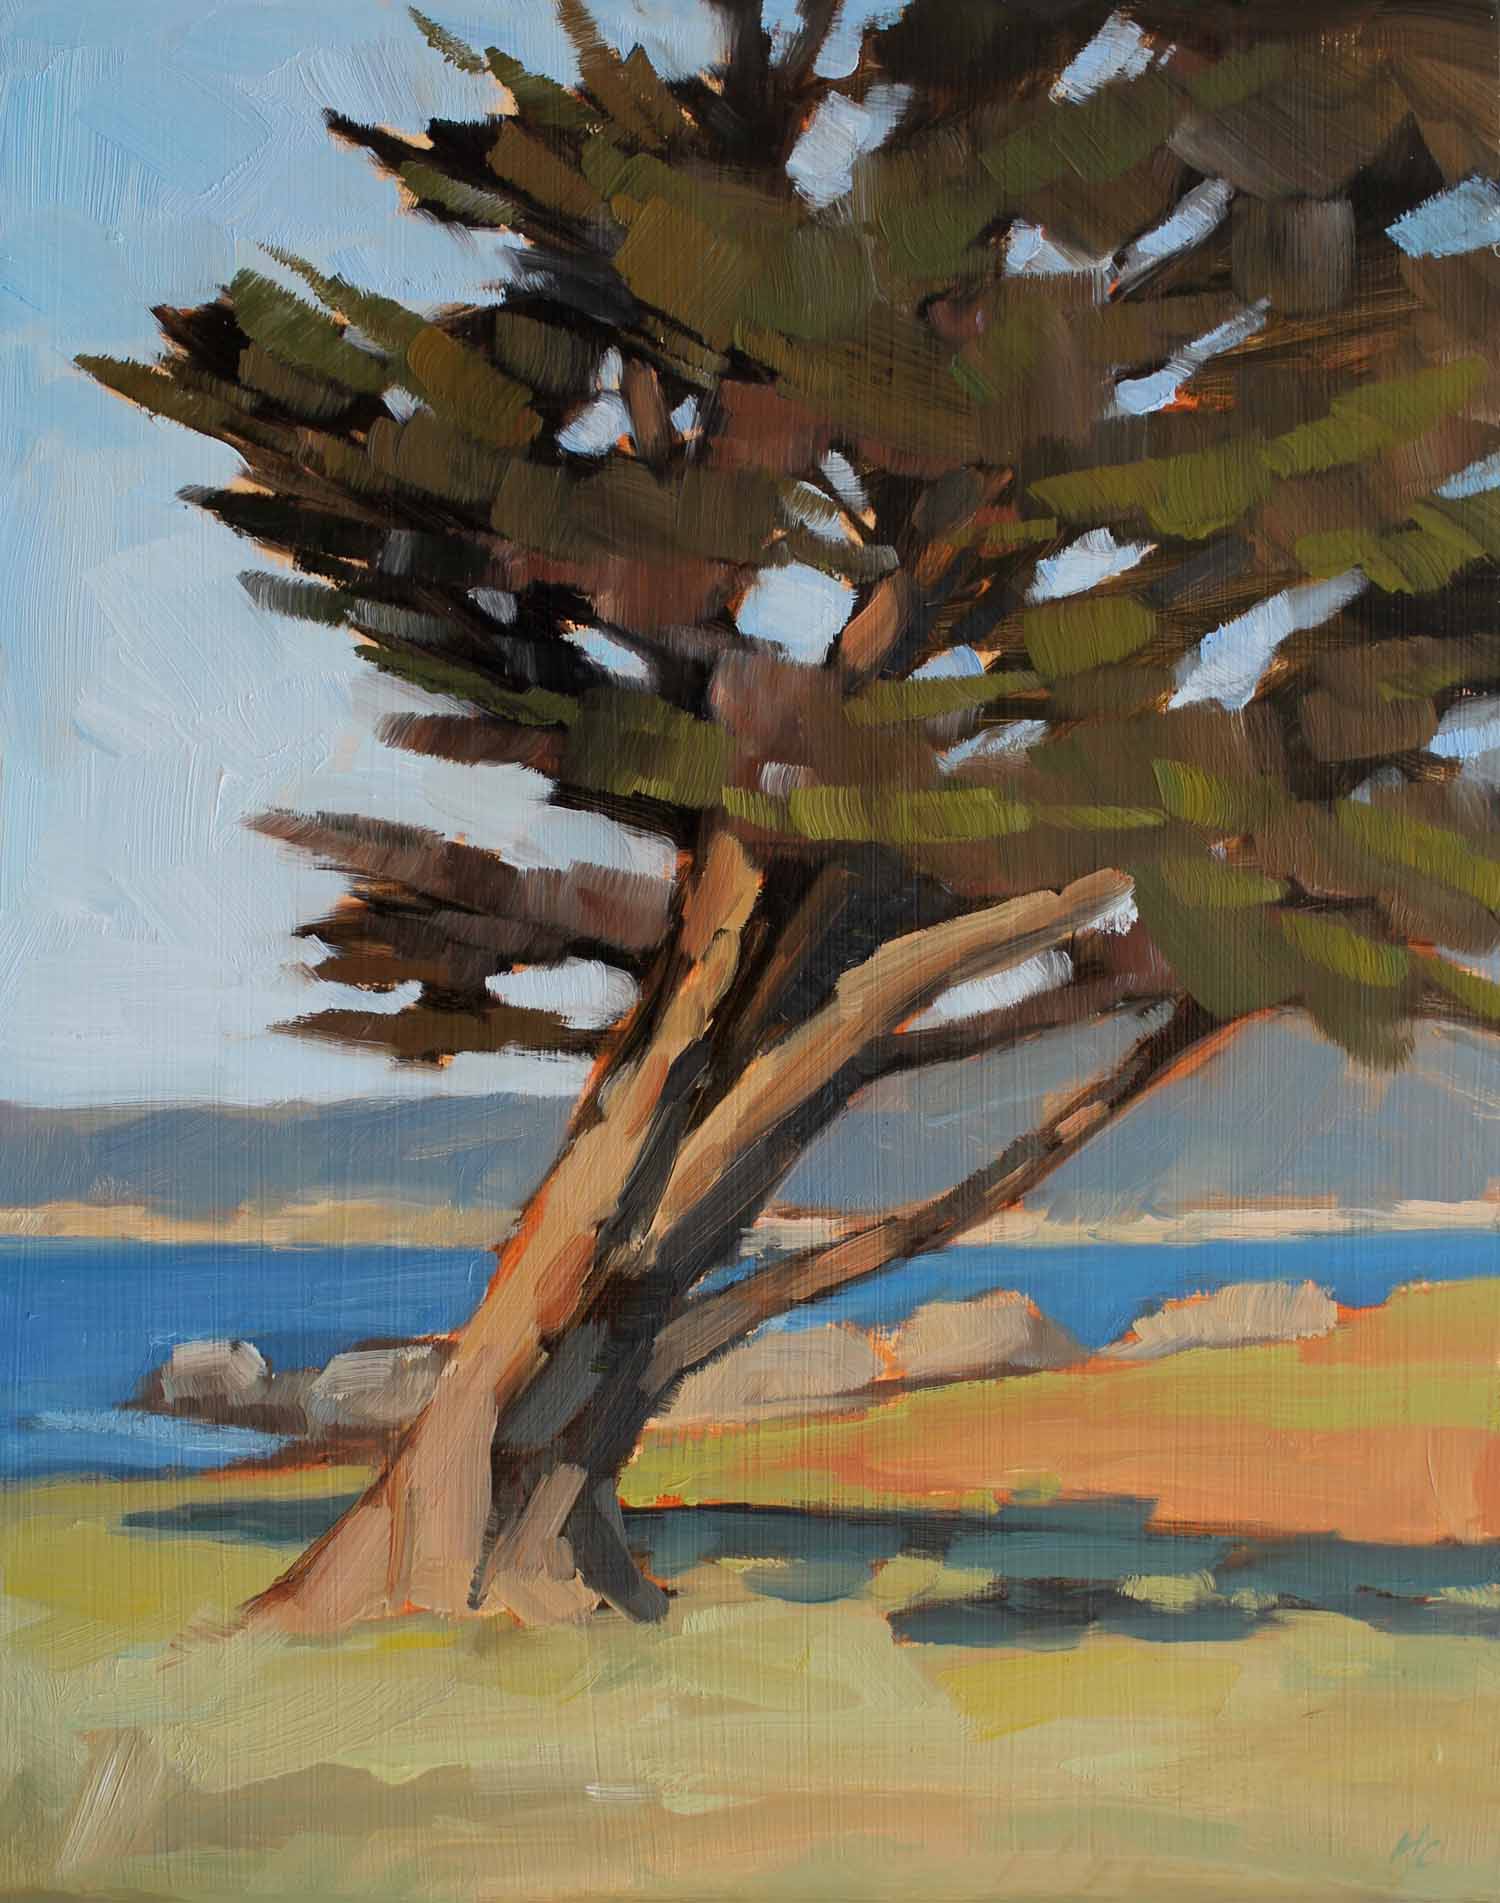 Leaning Cypress, Pacific Grove